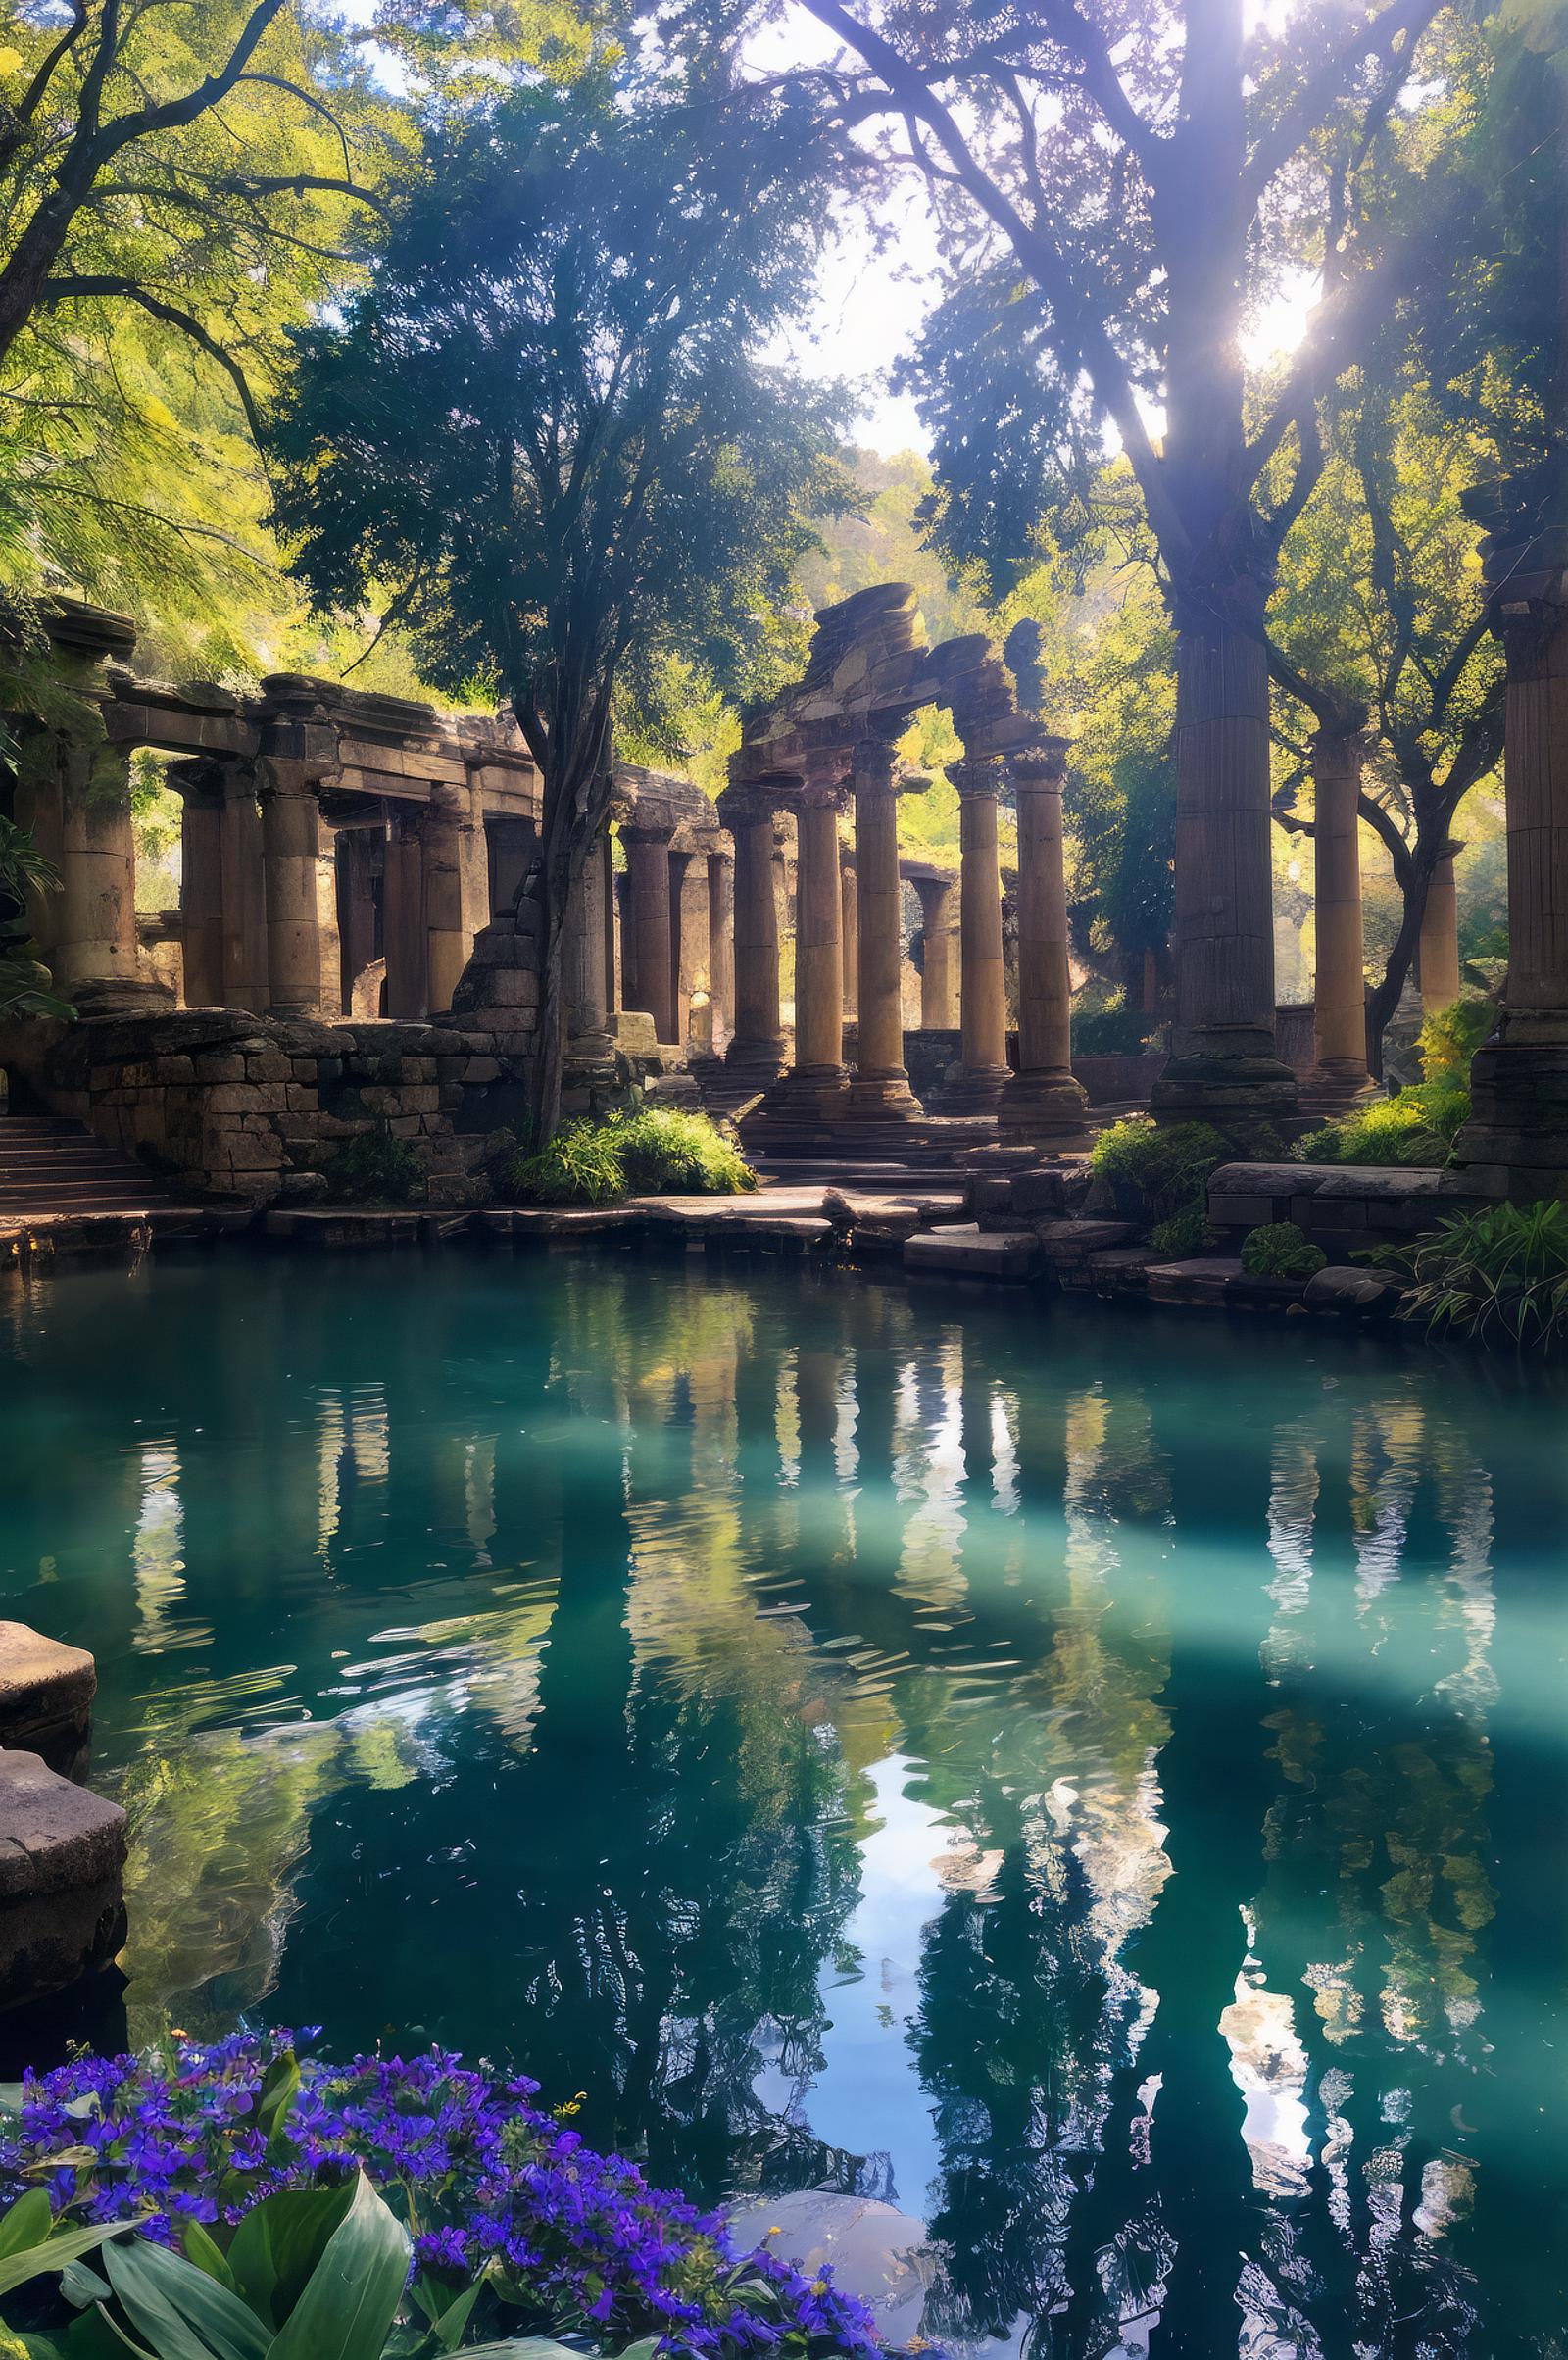 Ancient Stone Ruins with a Large Body of Water Reflecting the Sunlight